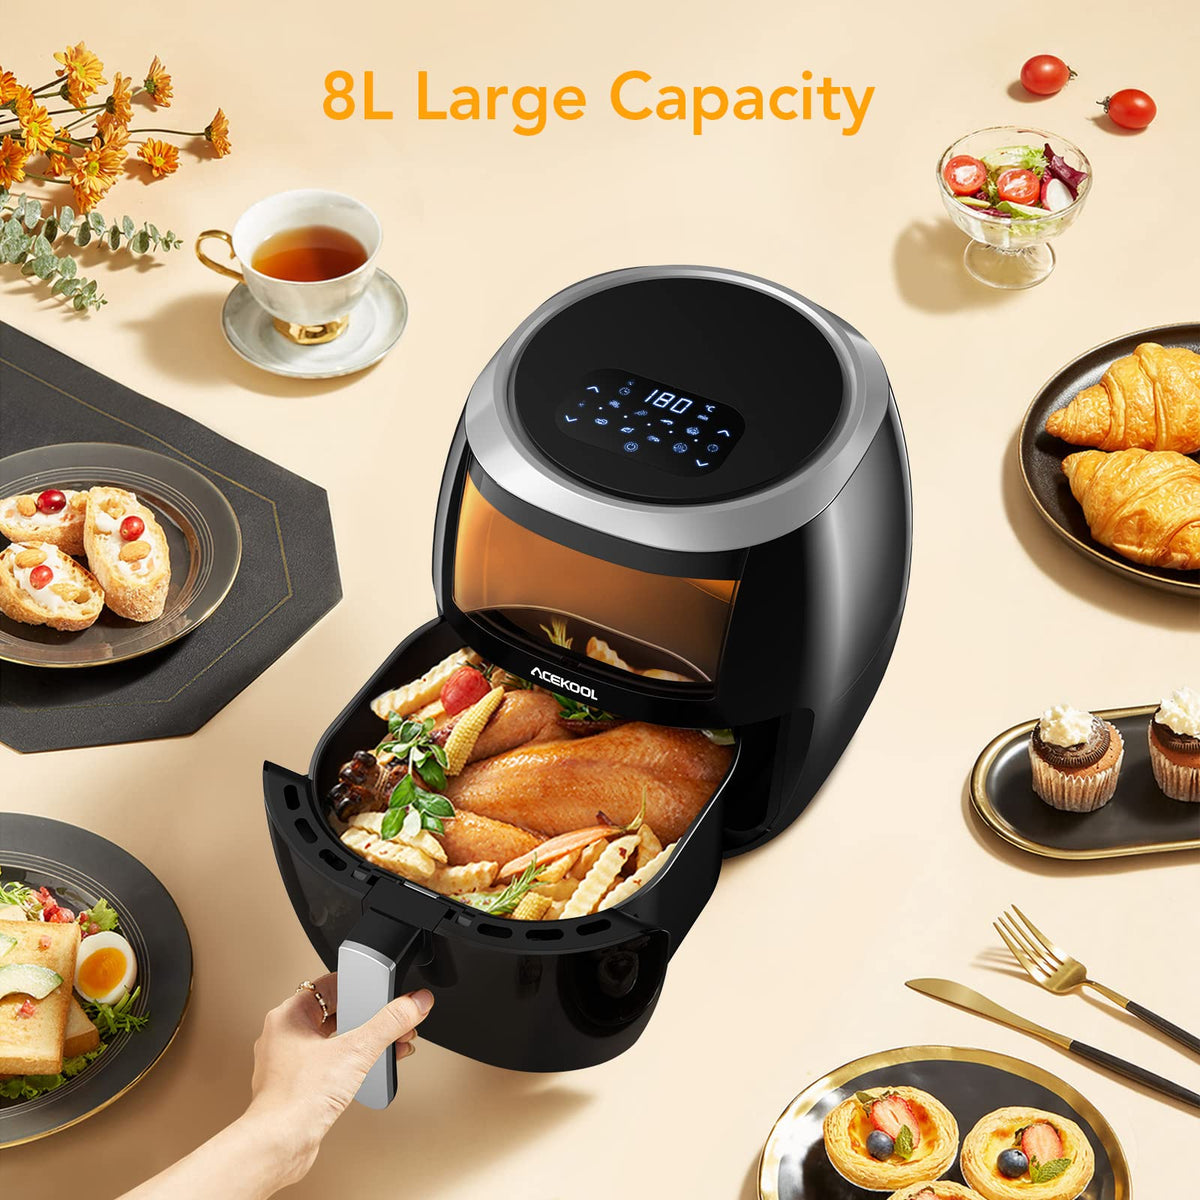 https://cdn.shopify.com/s/files/1/0653/1999/3584/products/acekool-air-fryer-ft2-touch-screen-with-visible-window10_56893edf-1282-48f5-b560-51ab700e7591_1200x.jpg?v=1659604761